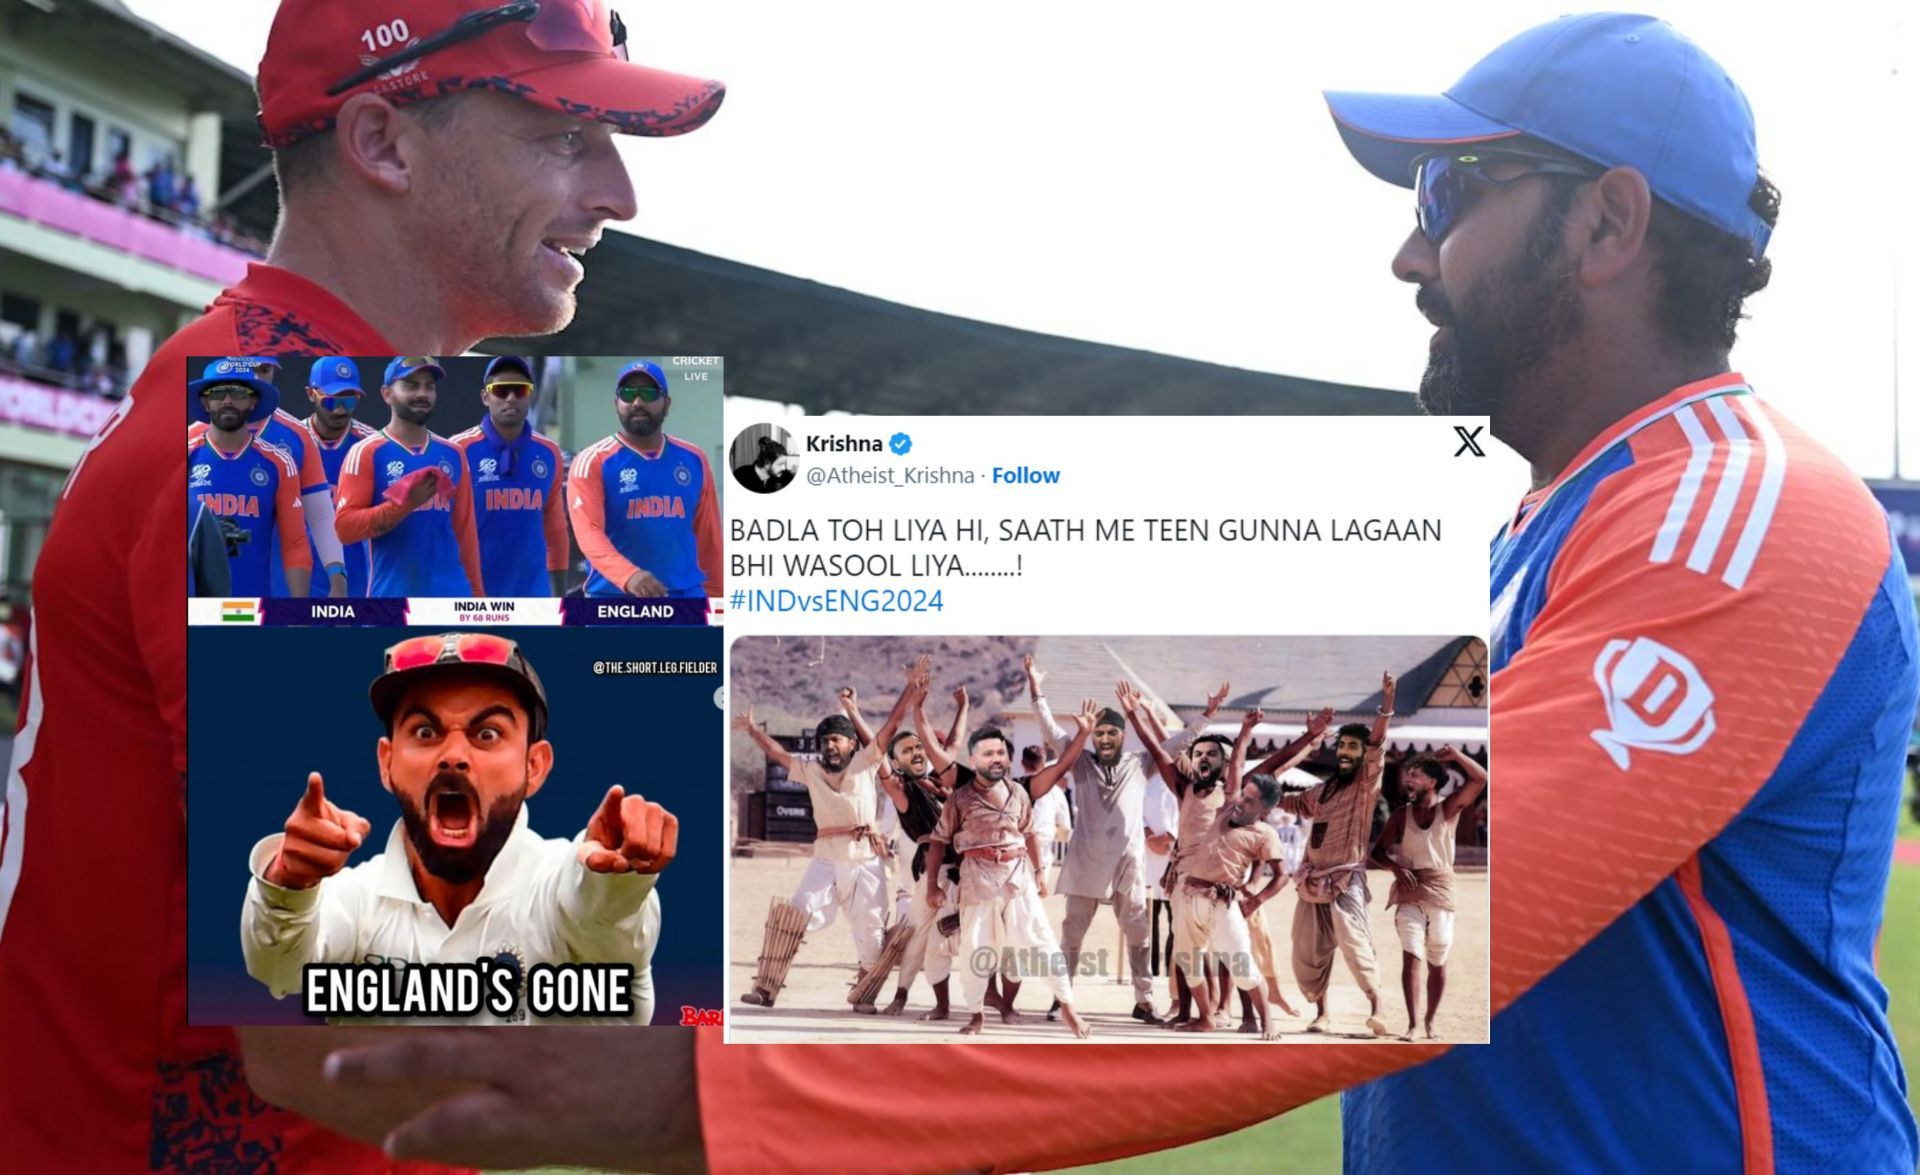 Fans share memes after England got knocked out of T20 WC. (Image: ICC, @Atheist_Krishna/X, @the.short.leg.fielder/Instagram)